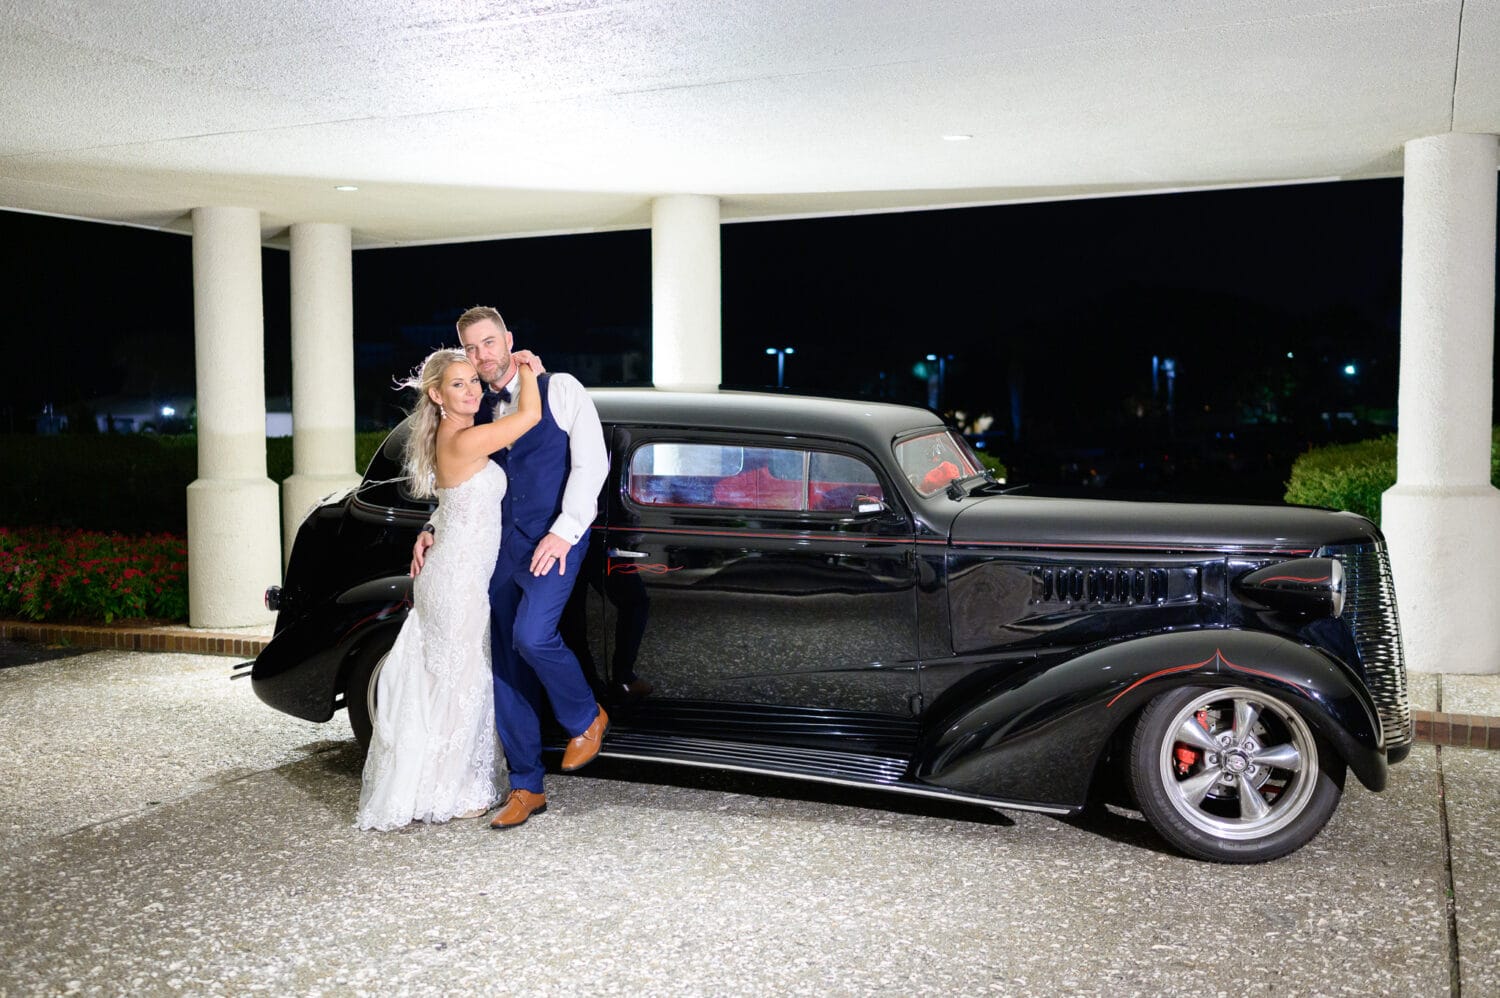 Bride and groom with classic car at night - Dunes Golf and Beach Club